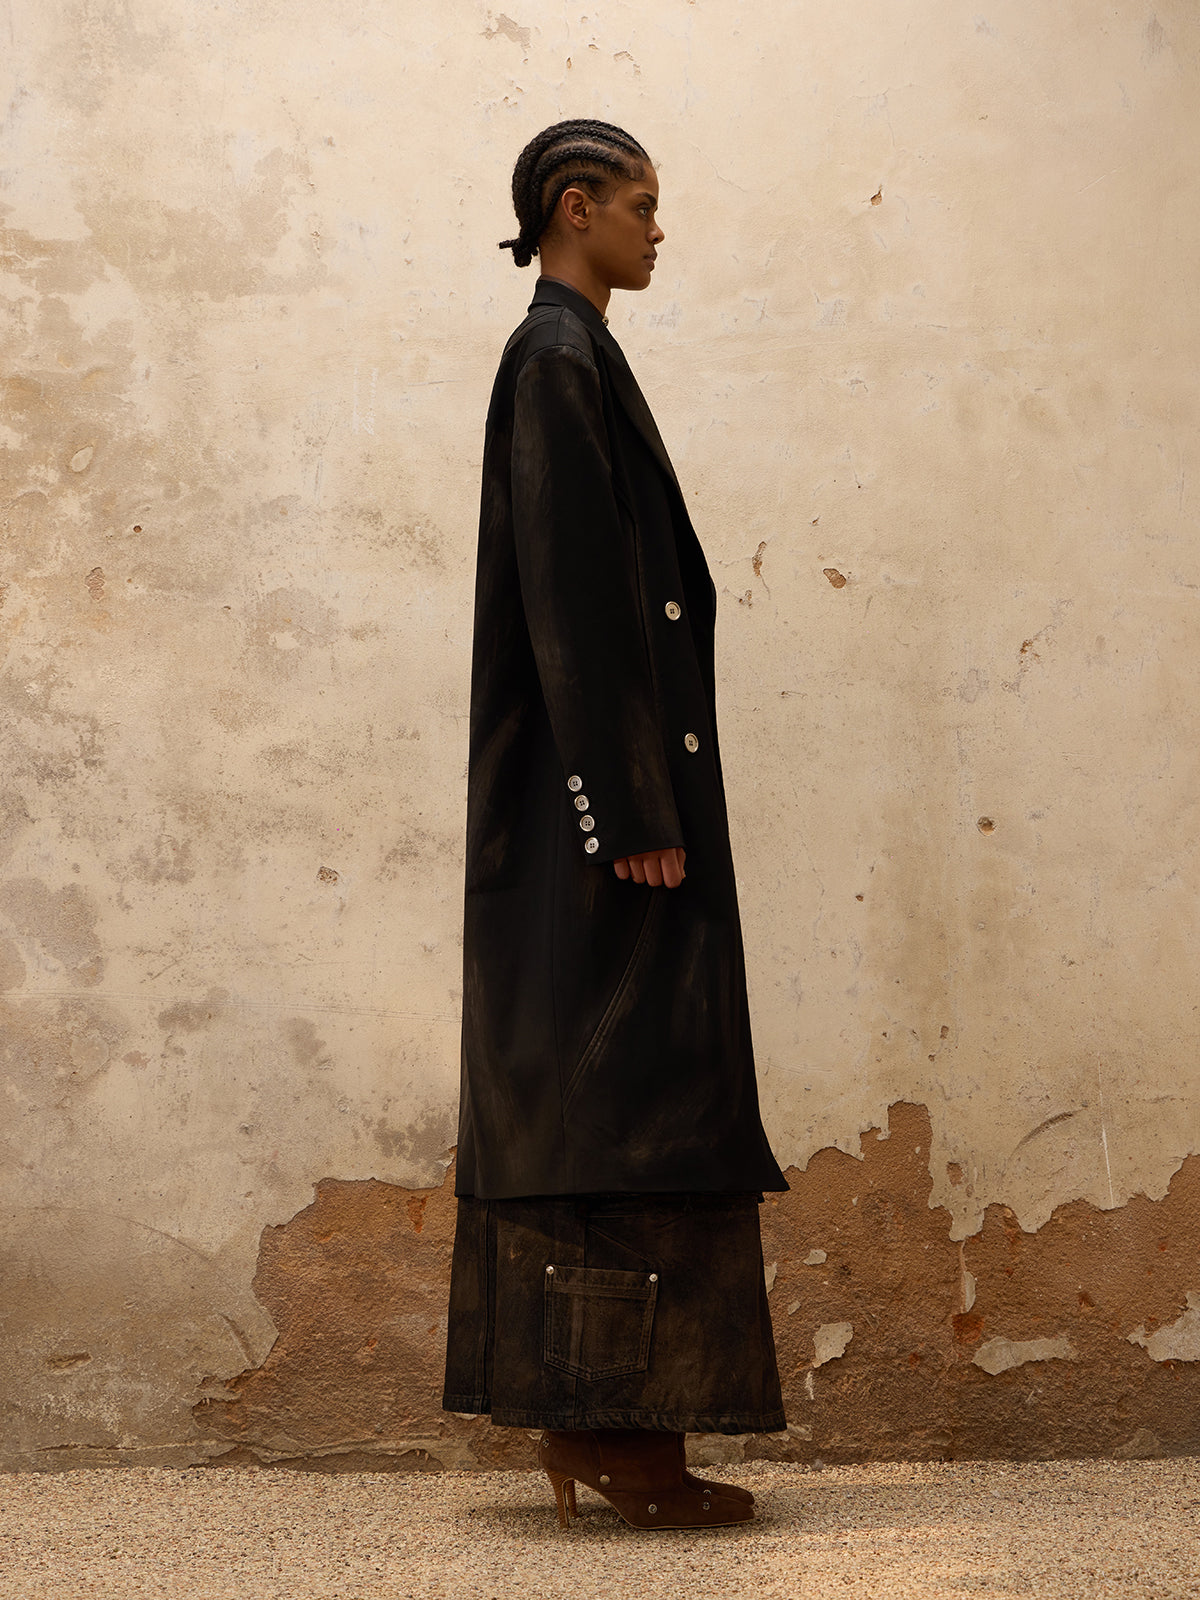 Personsoul Dirty Trench Coat